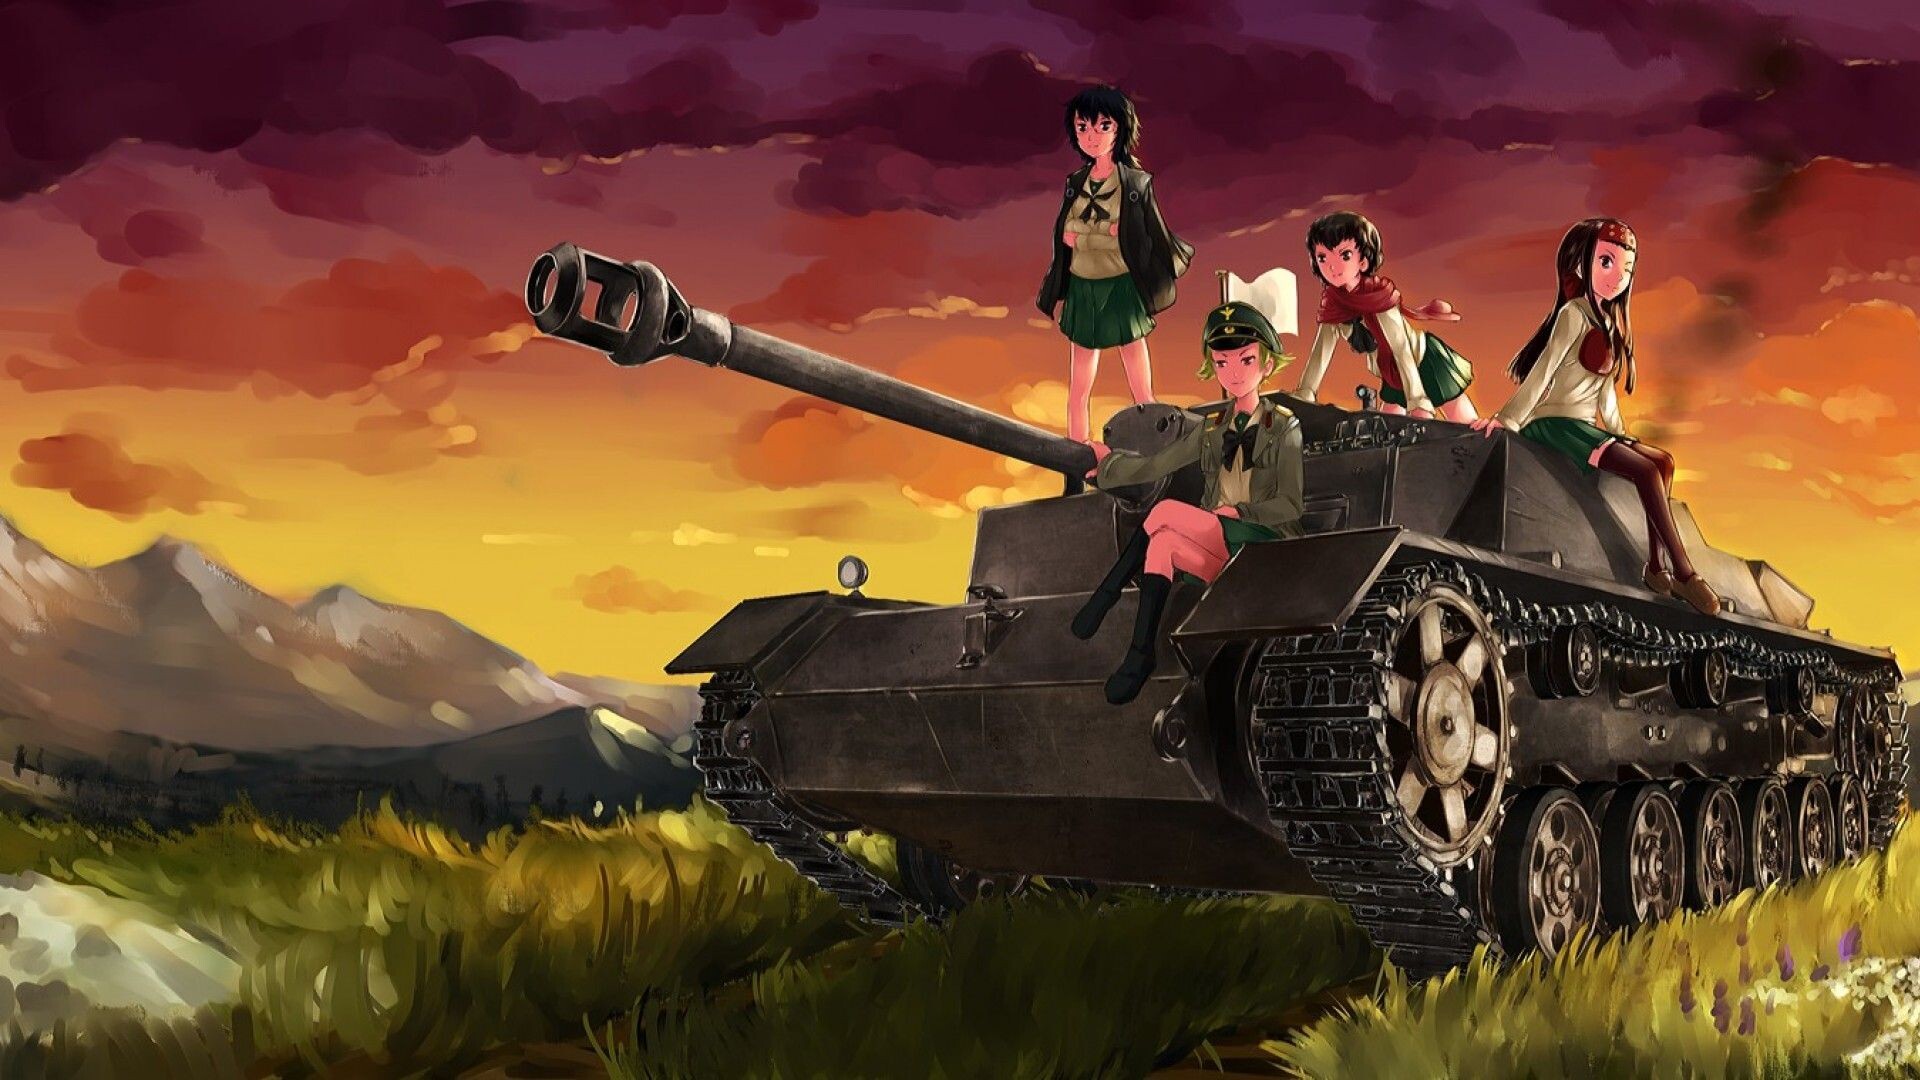 Girls und Panzer: The commander of the tank squad leading it during tank battles, Anime series created by Actas. 1920x1080 Full HD Wallpaper.